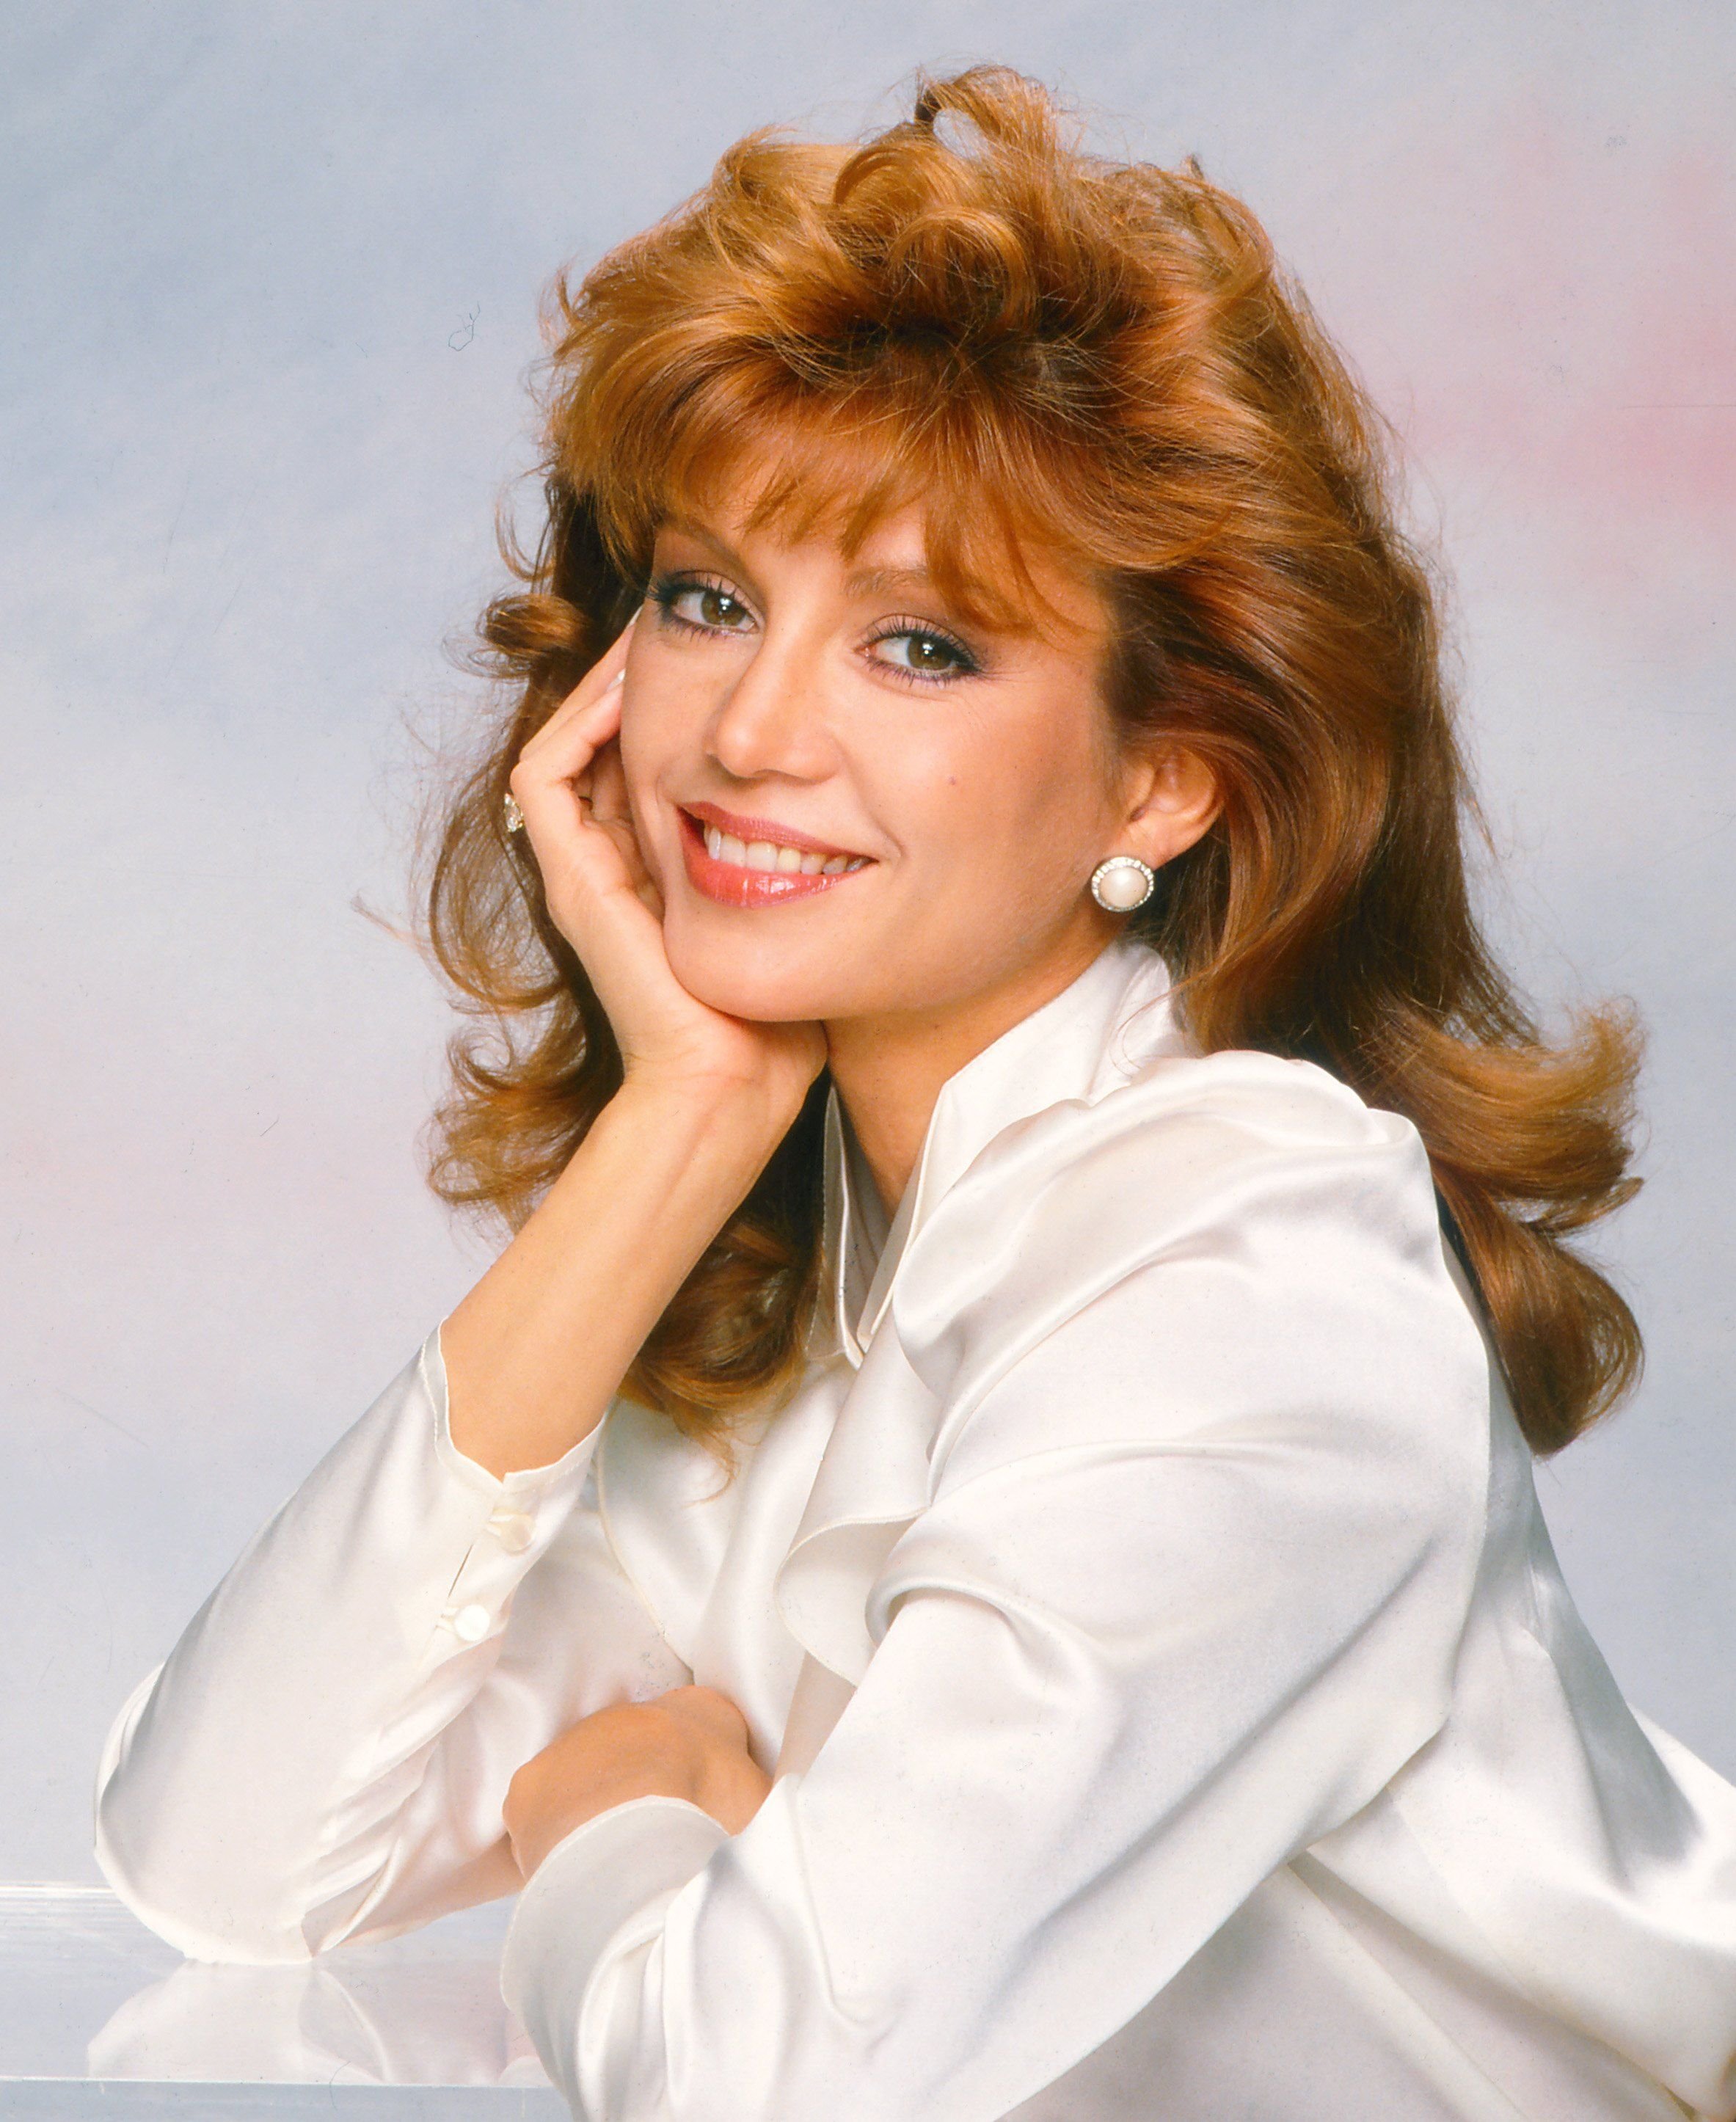 Actress Victoria Principal poses for a portrait in 1985 in Los Angeles, California. | Source: Getty Images